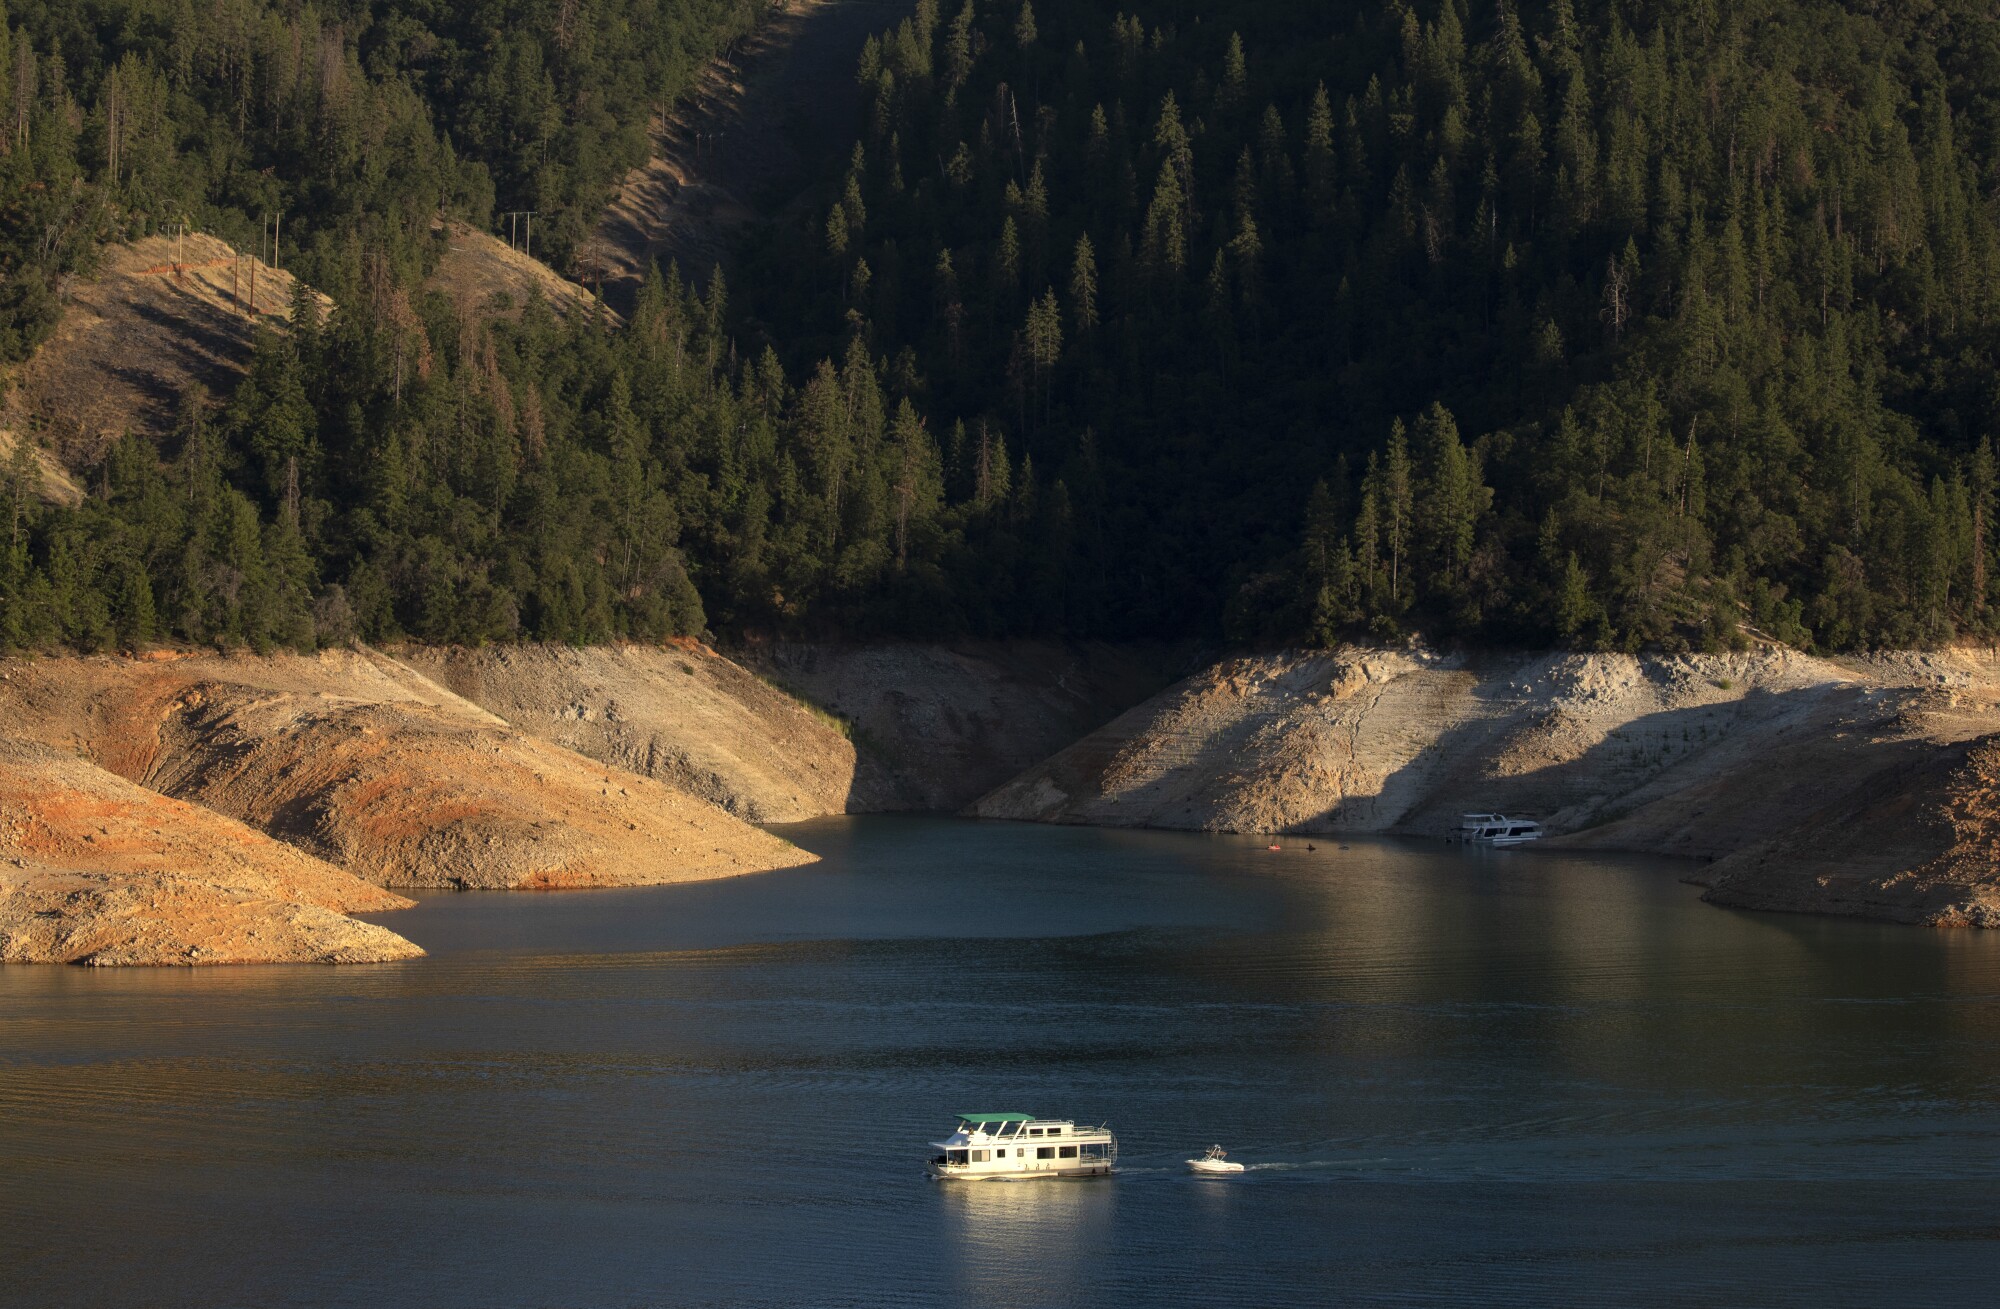 A houseboat is framed by deep bathtub rings from years of drought on California's Shasta Lake.